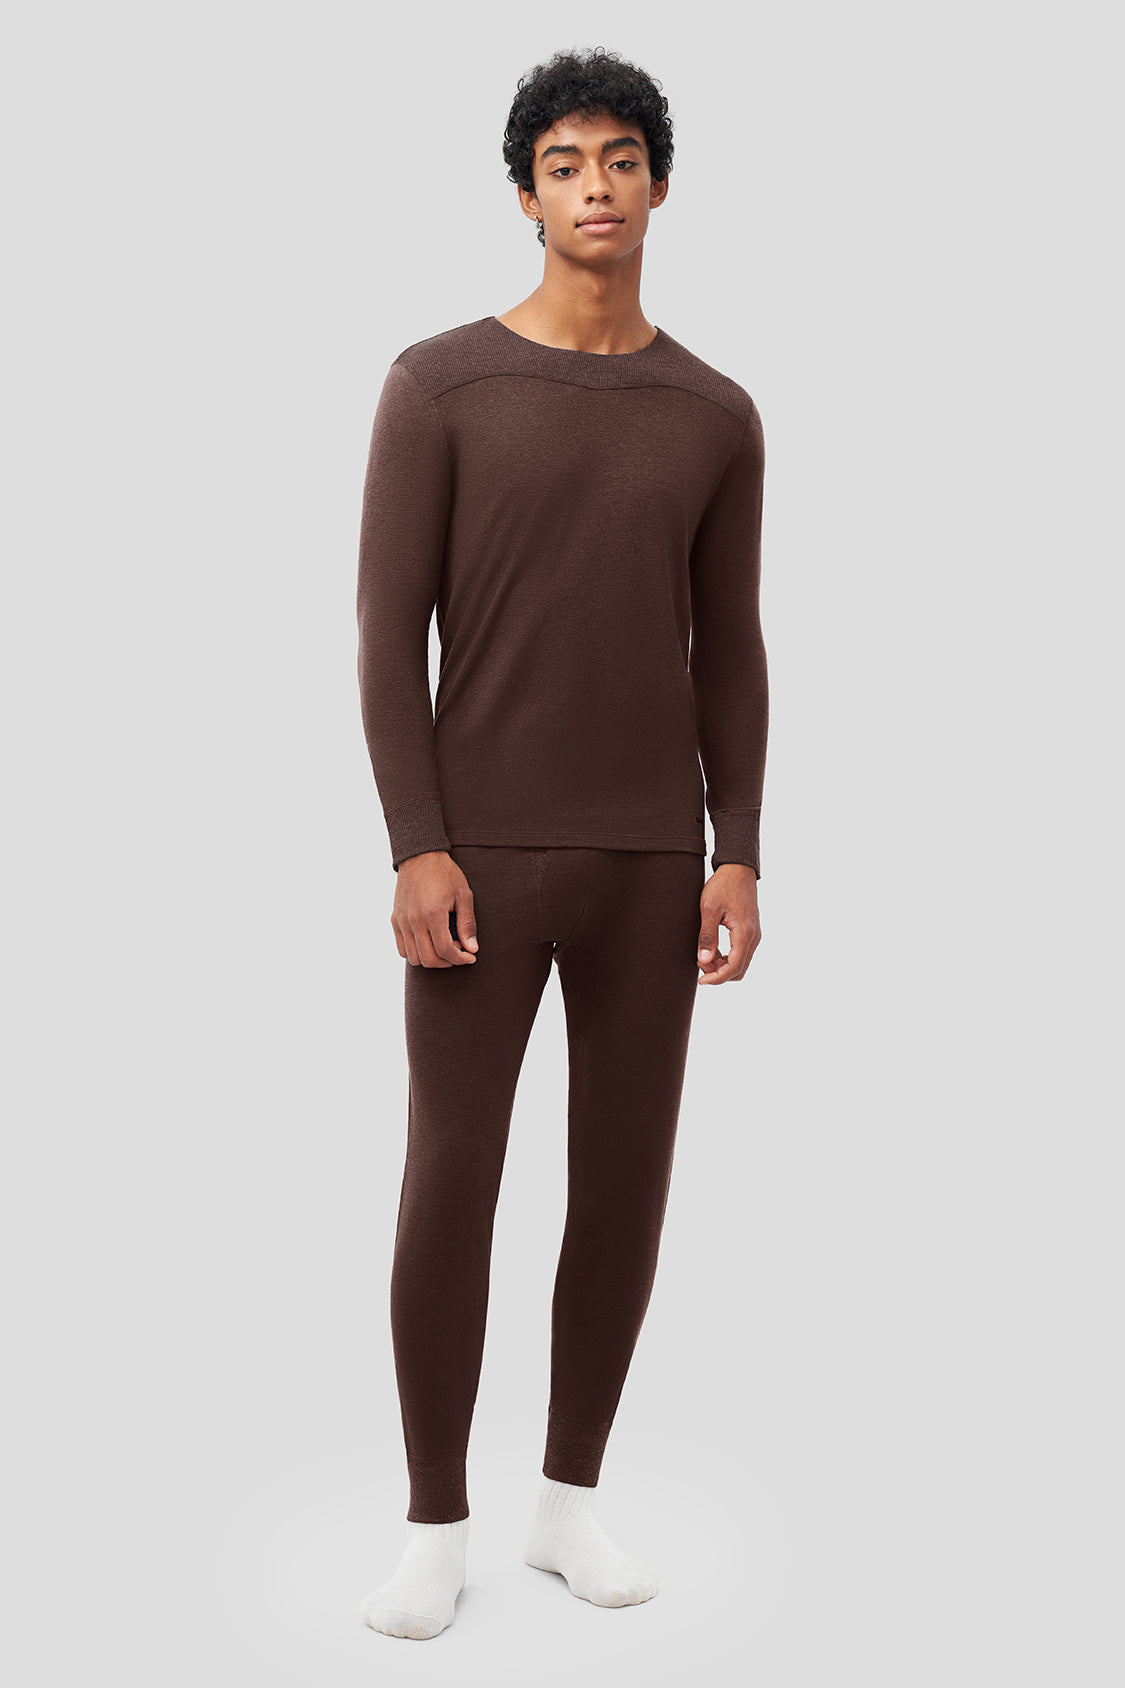 Men's Base Layers and Thermals